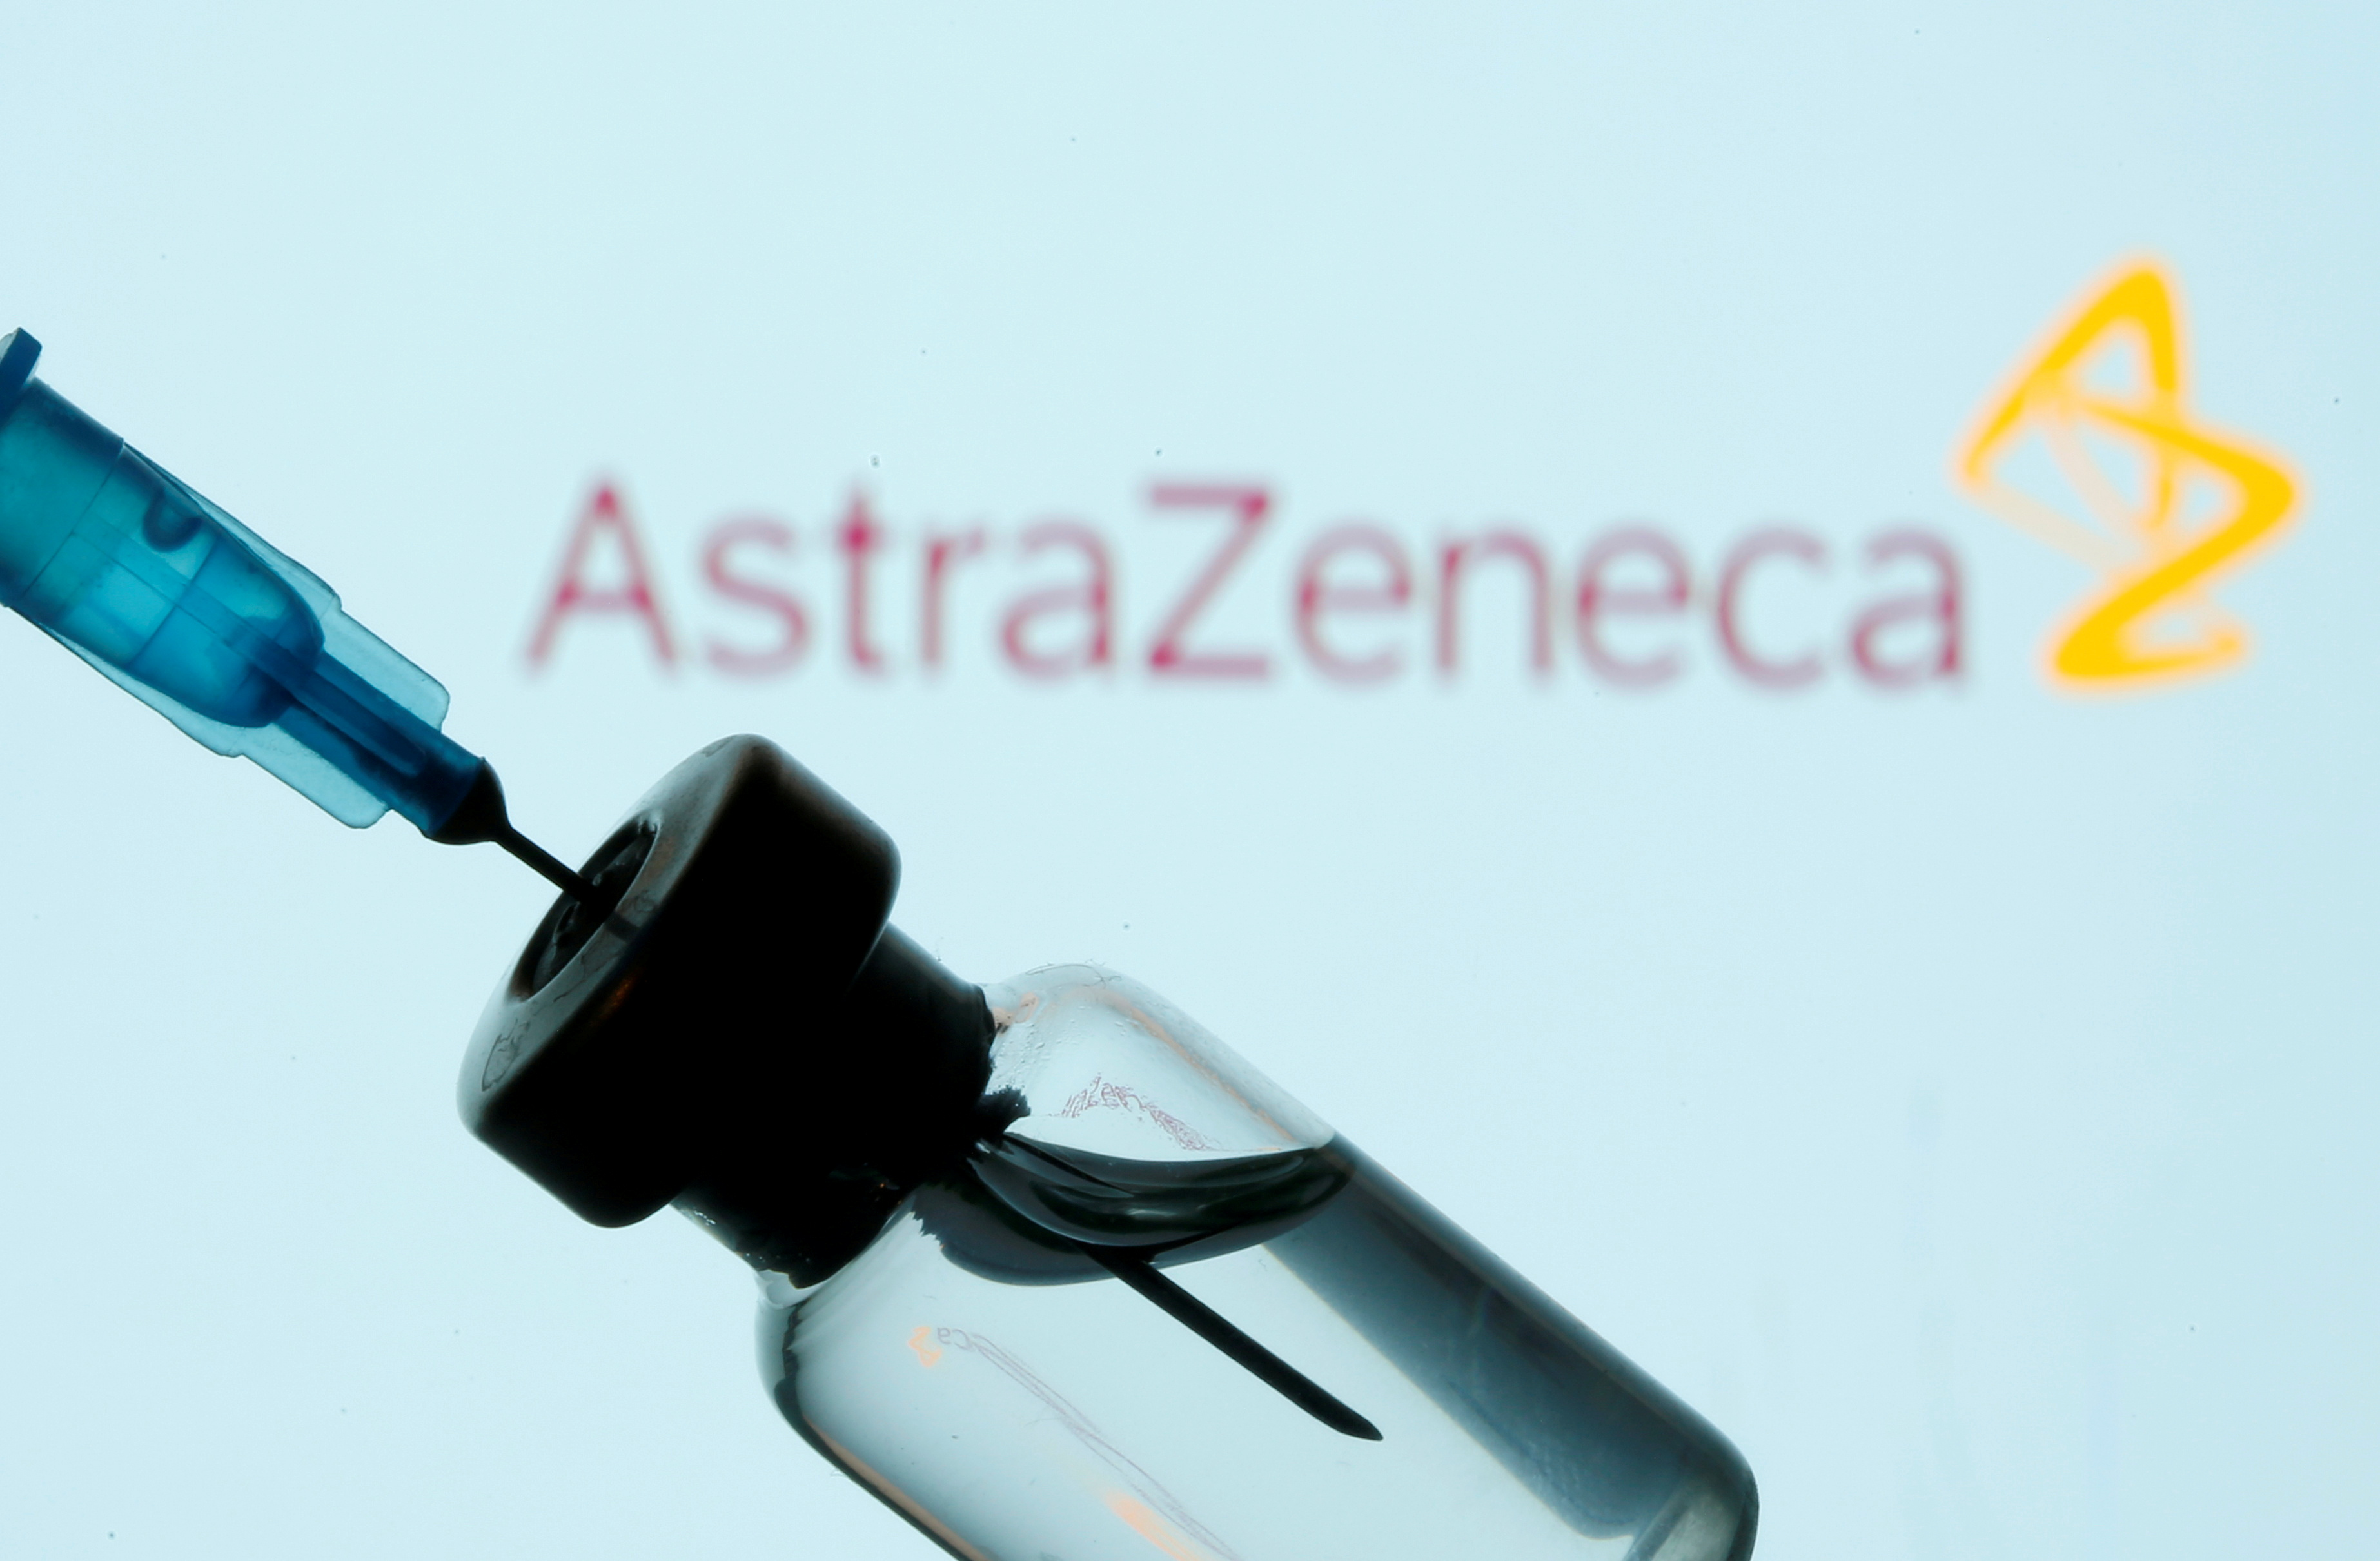 Vial and sryinge are seen in front of displayed AstraZeneca logo